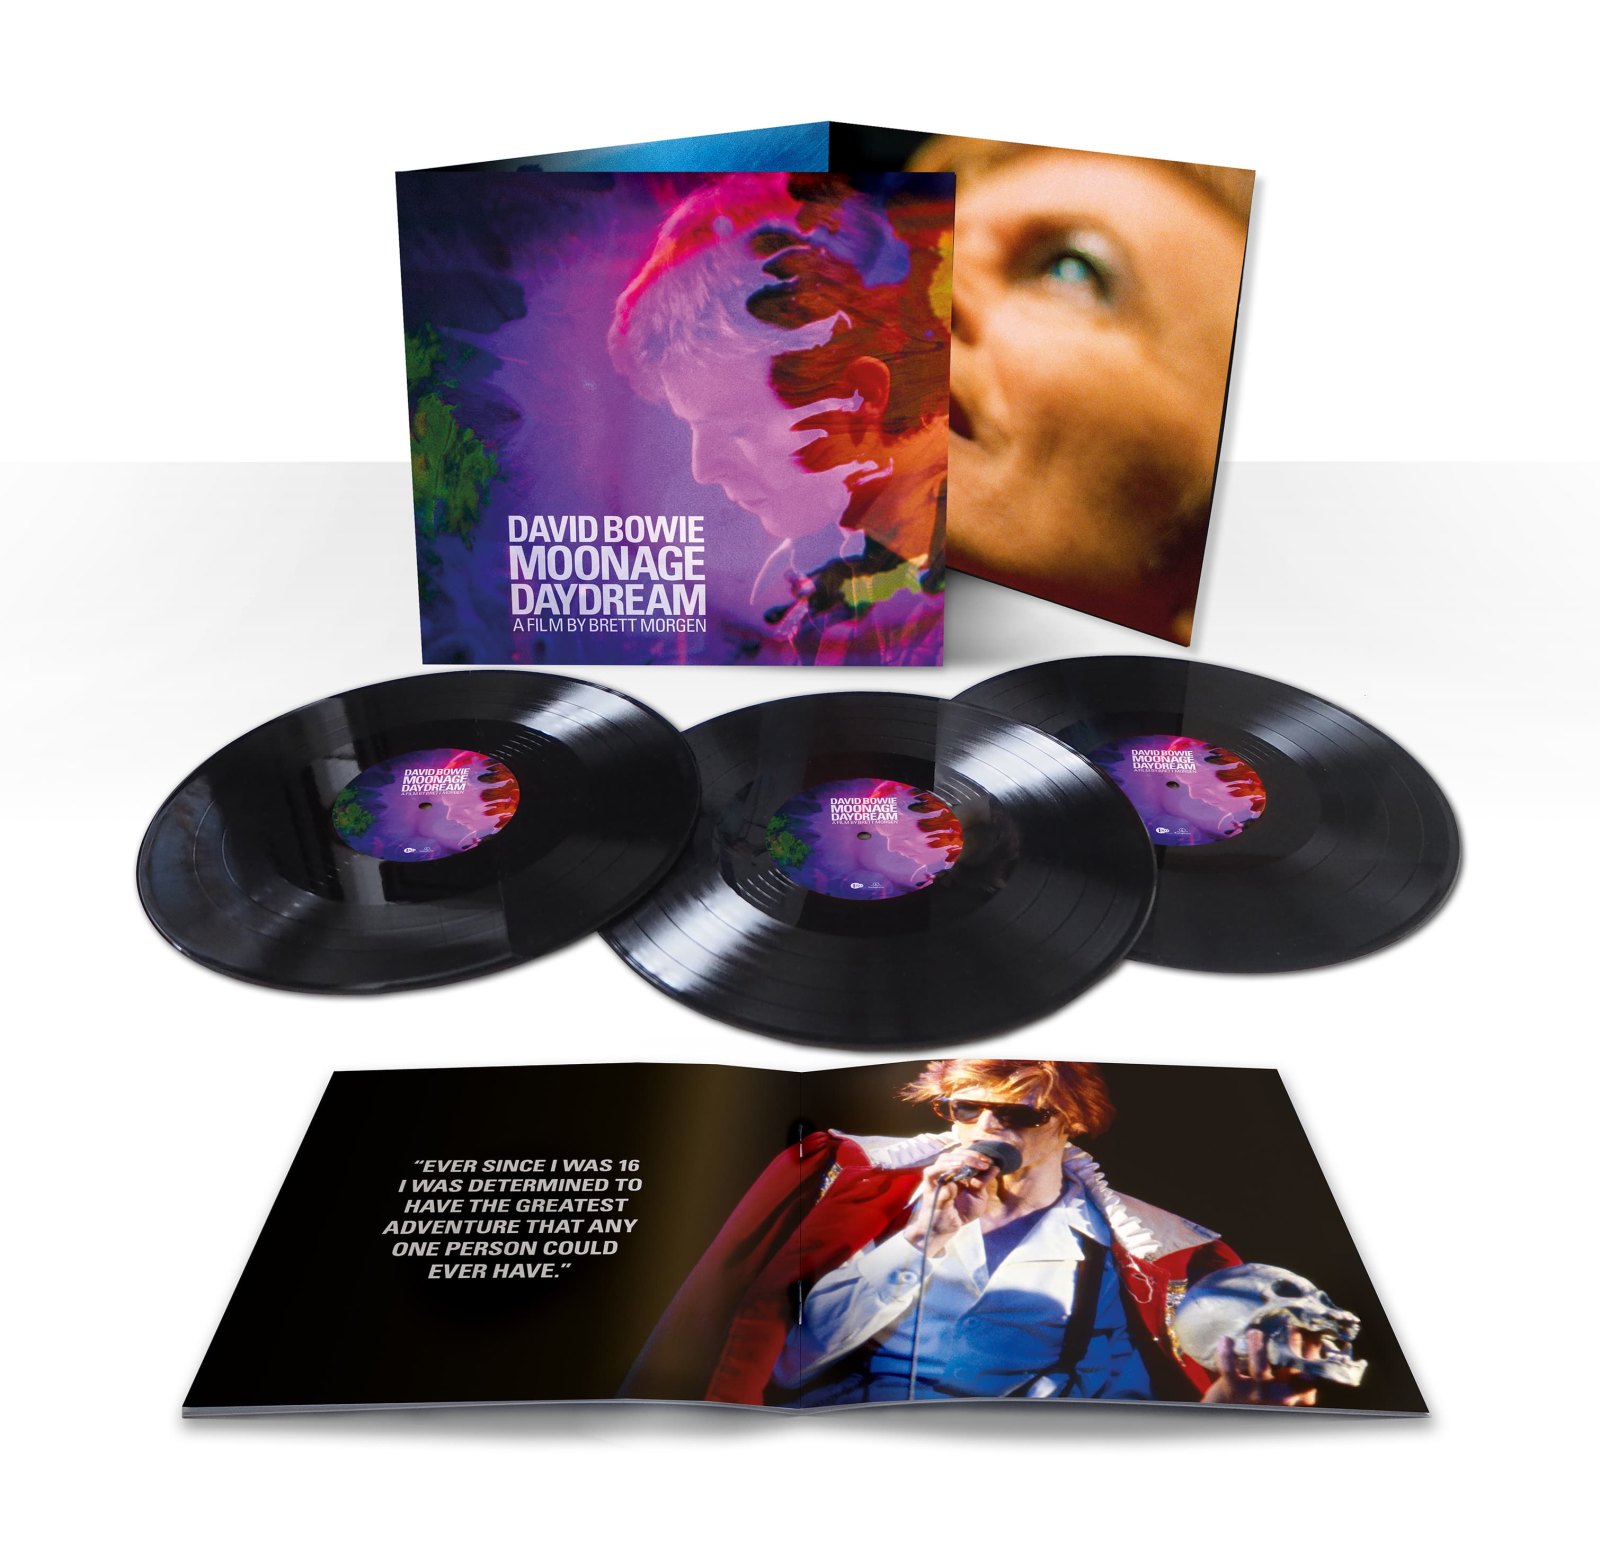 BOWIE DAVID - Moonage Daydream - Limited Edition